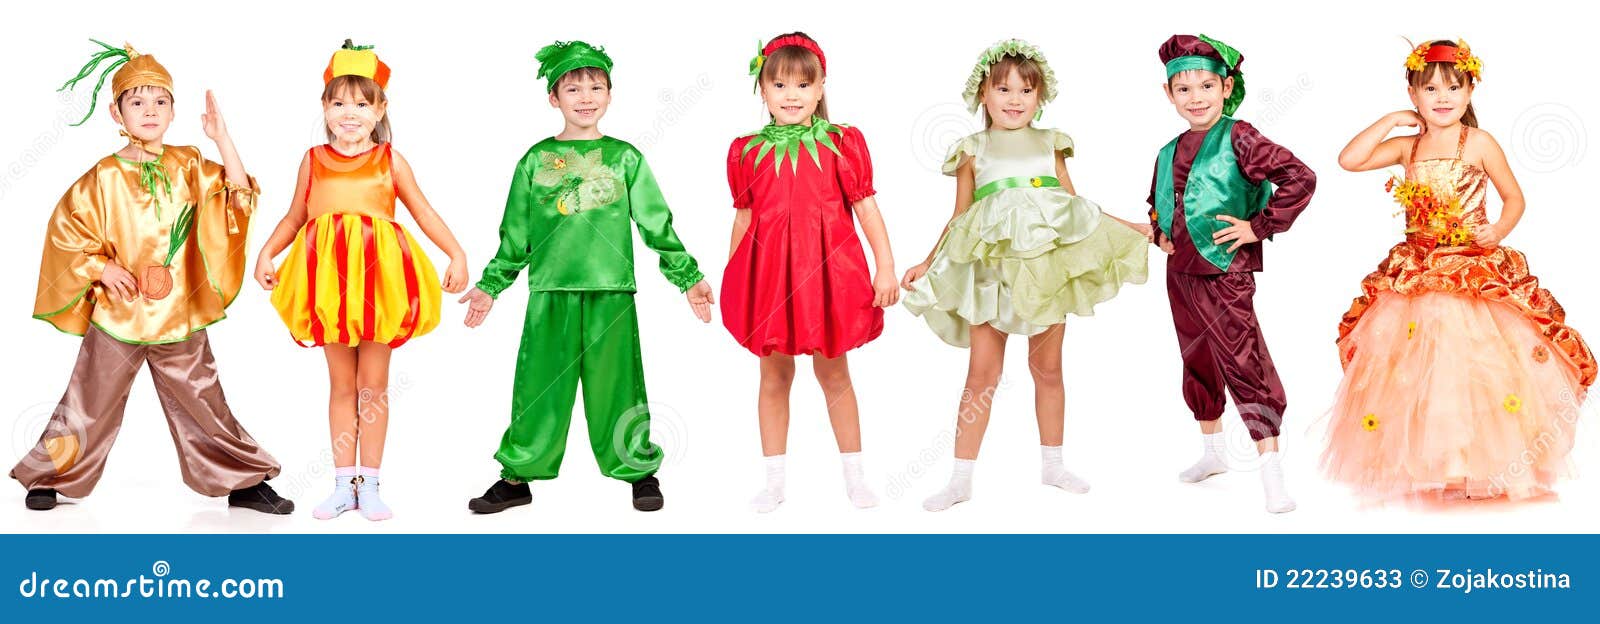 Children in Bright Fancy Dress Stock Image - Image of dress, clothing:  22239633